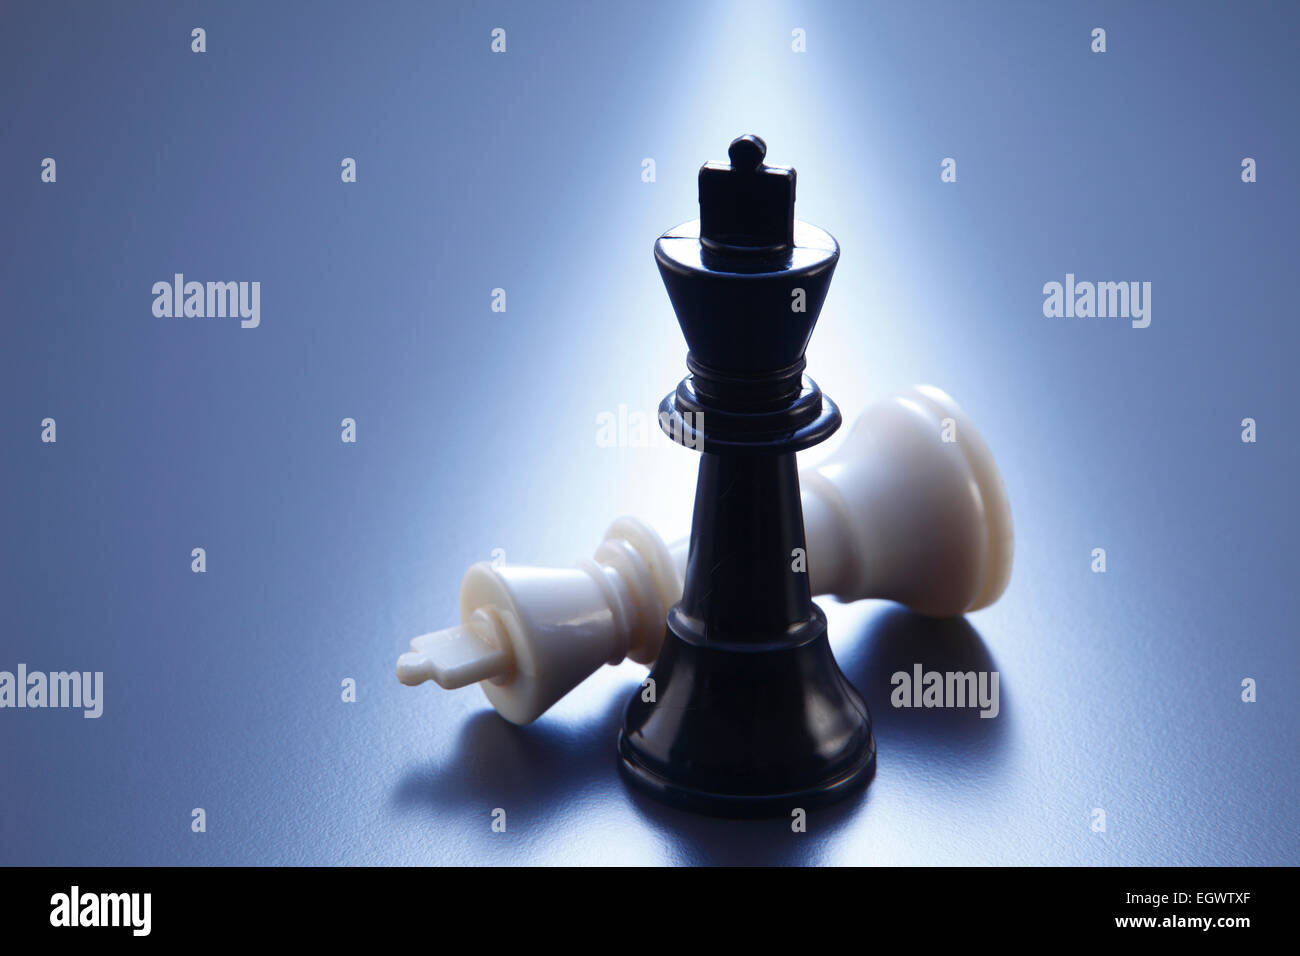 kings of the chess on the blue background Stock Photo